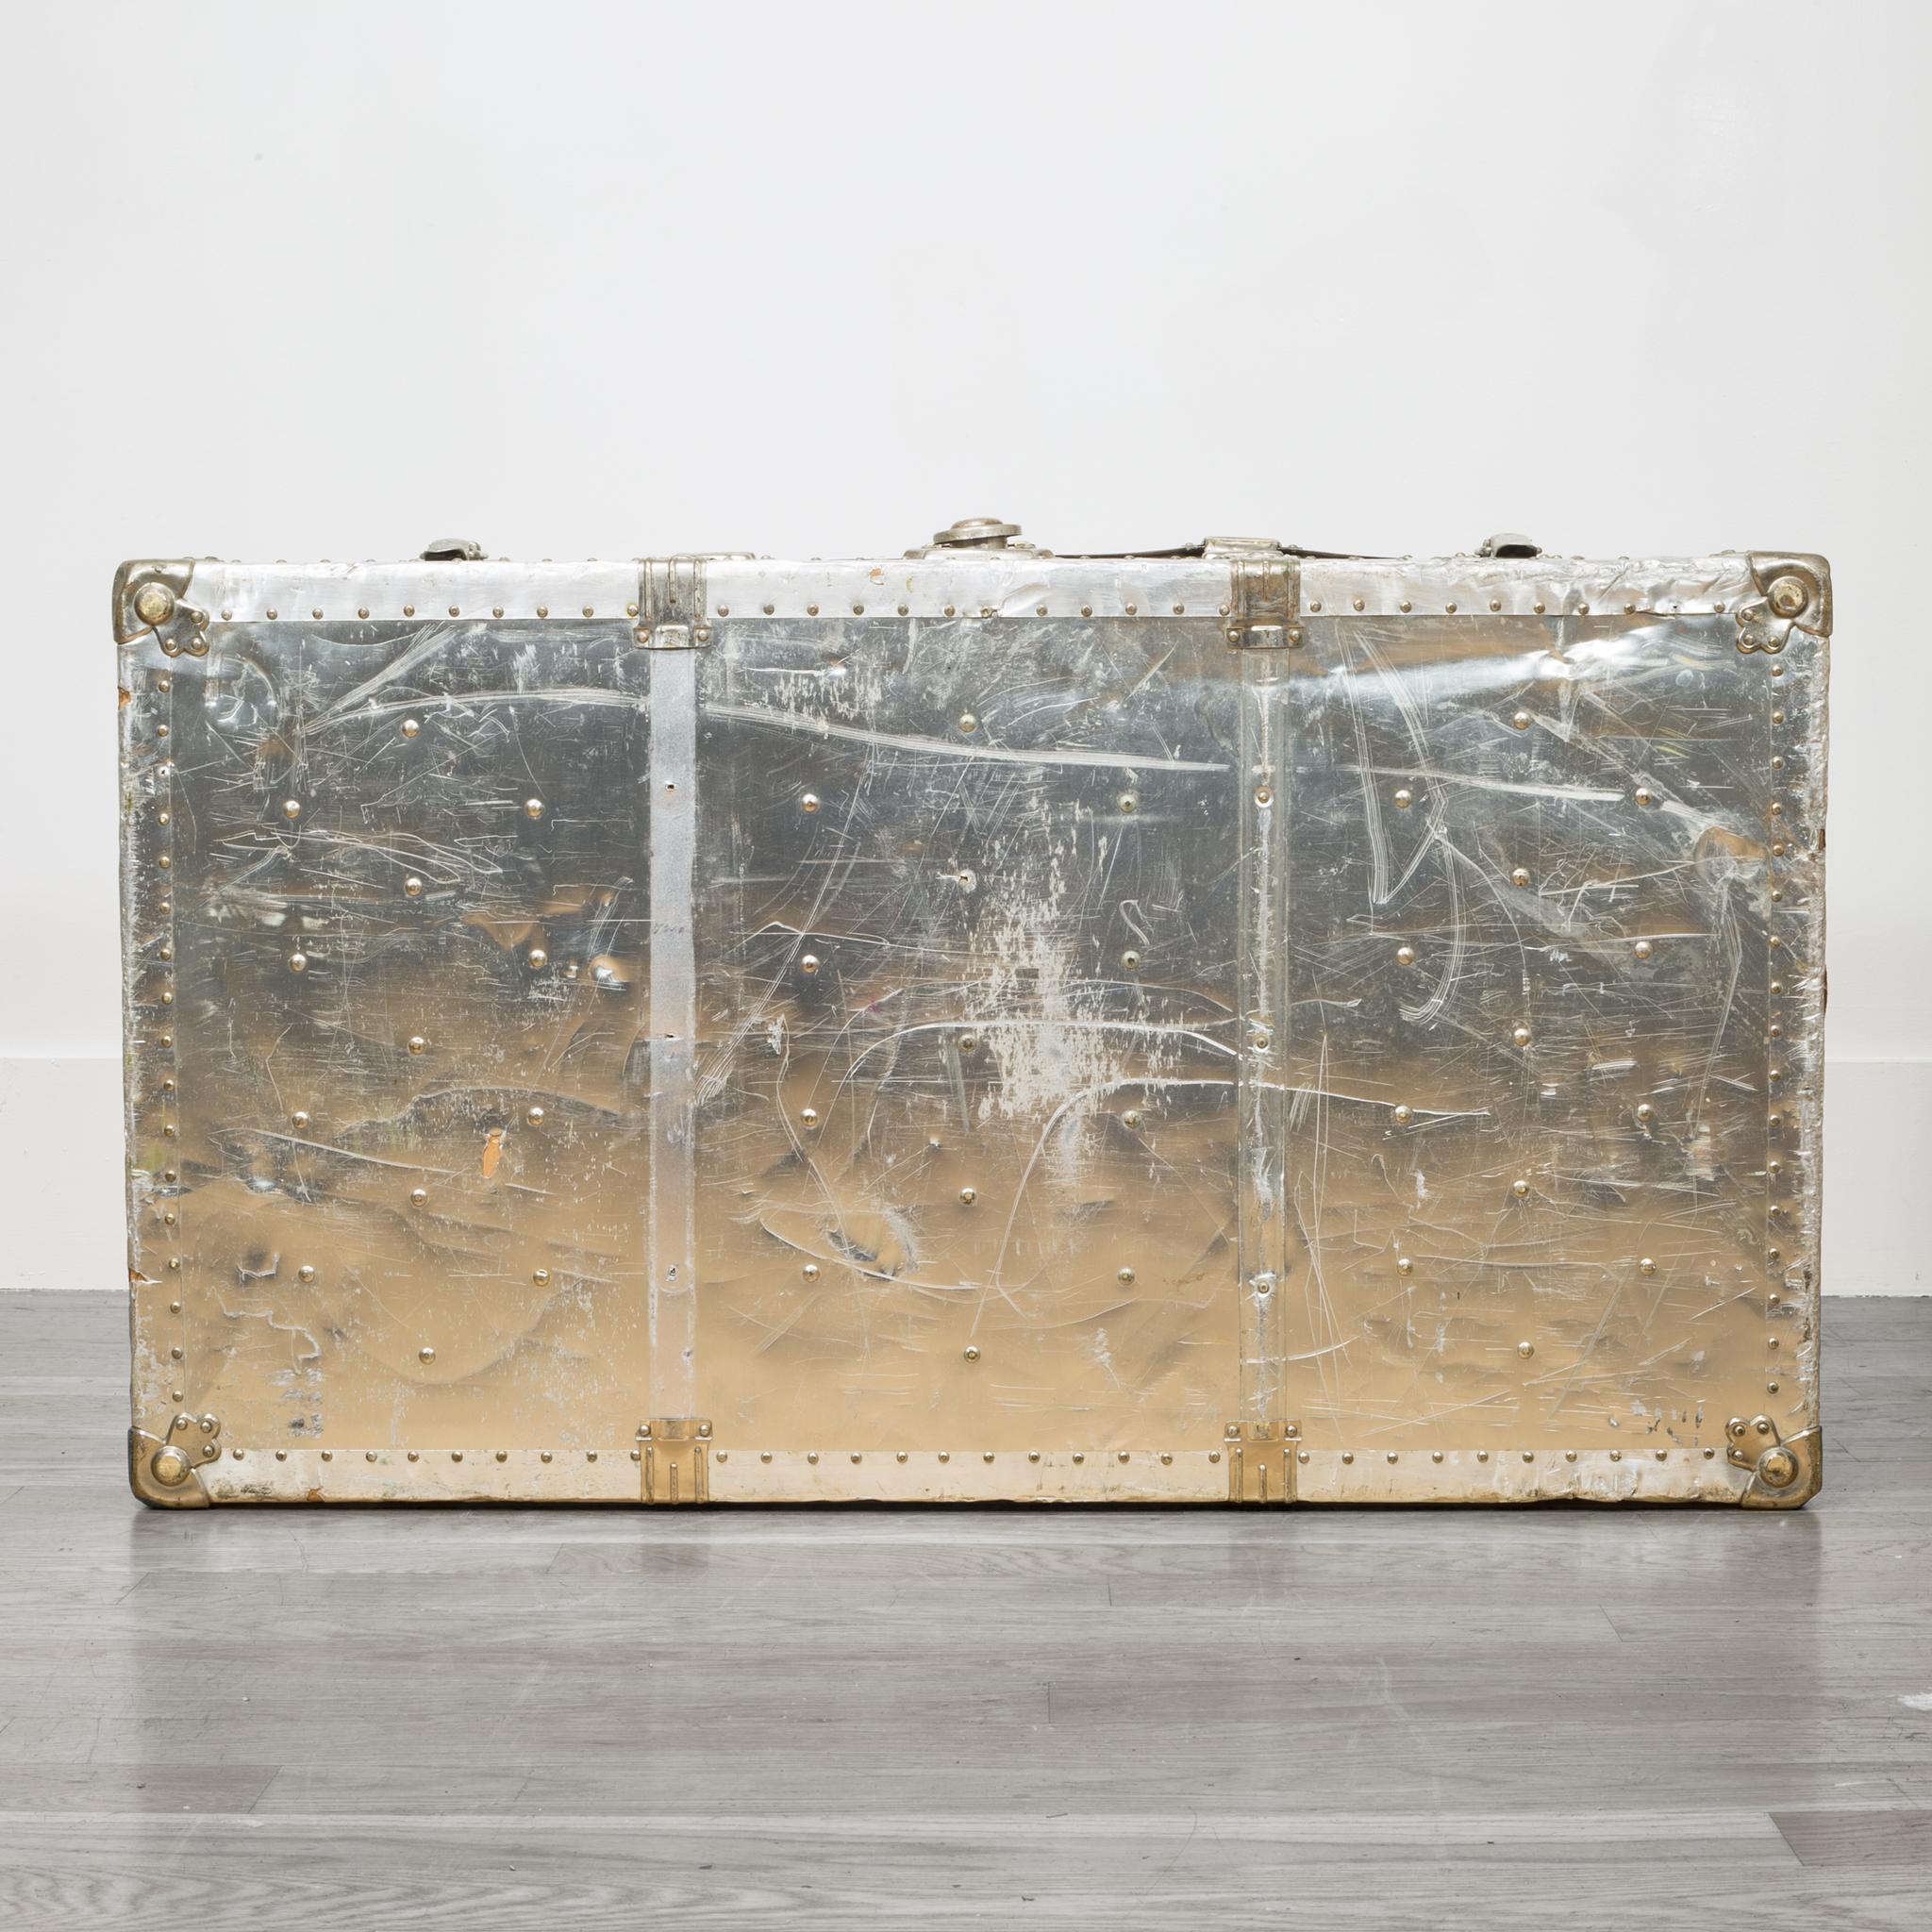 Early 20th Century Brass and Polished Aluminum Trunk with Leather Handles (20. Jahrhundert)